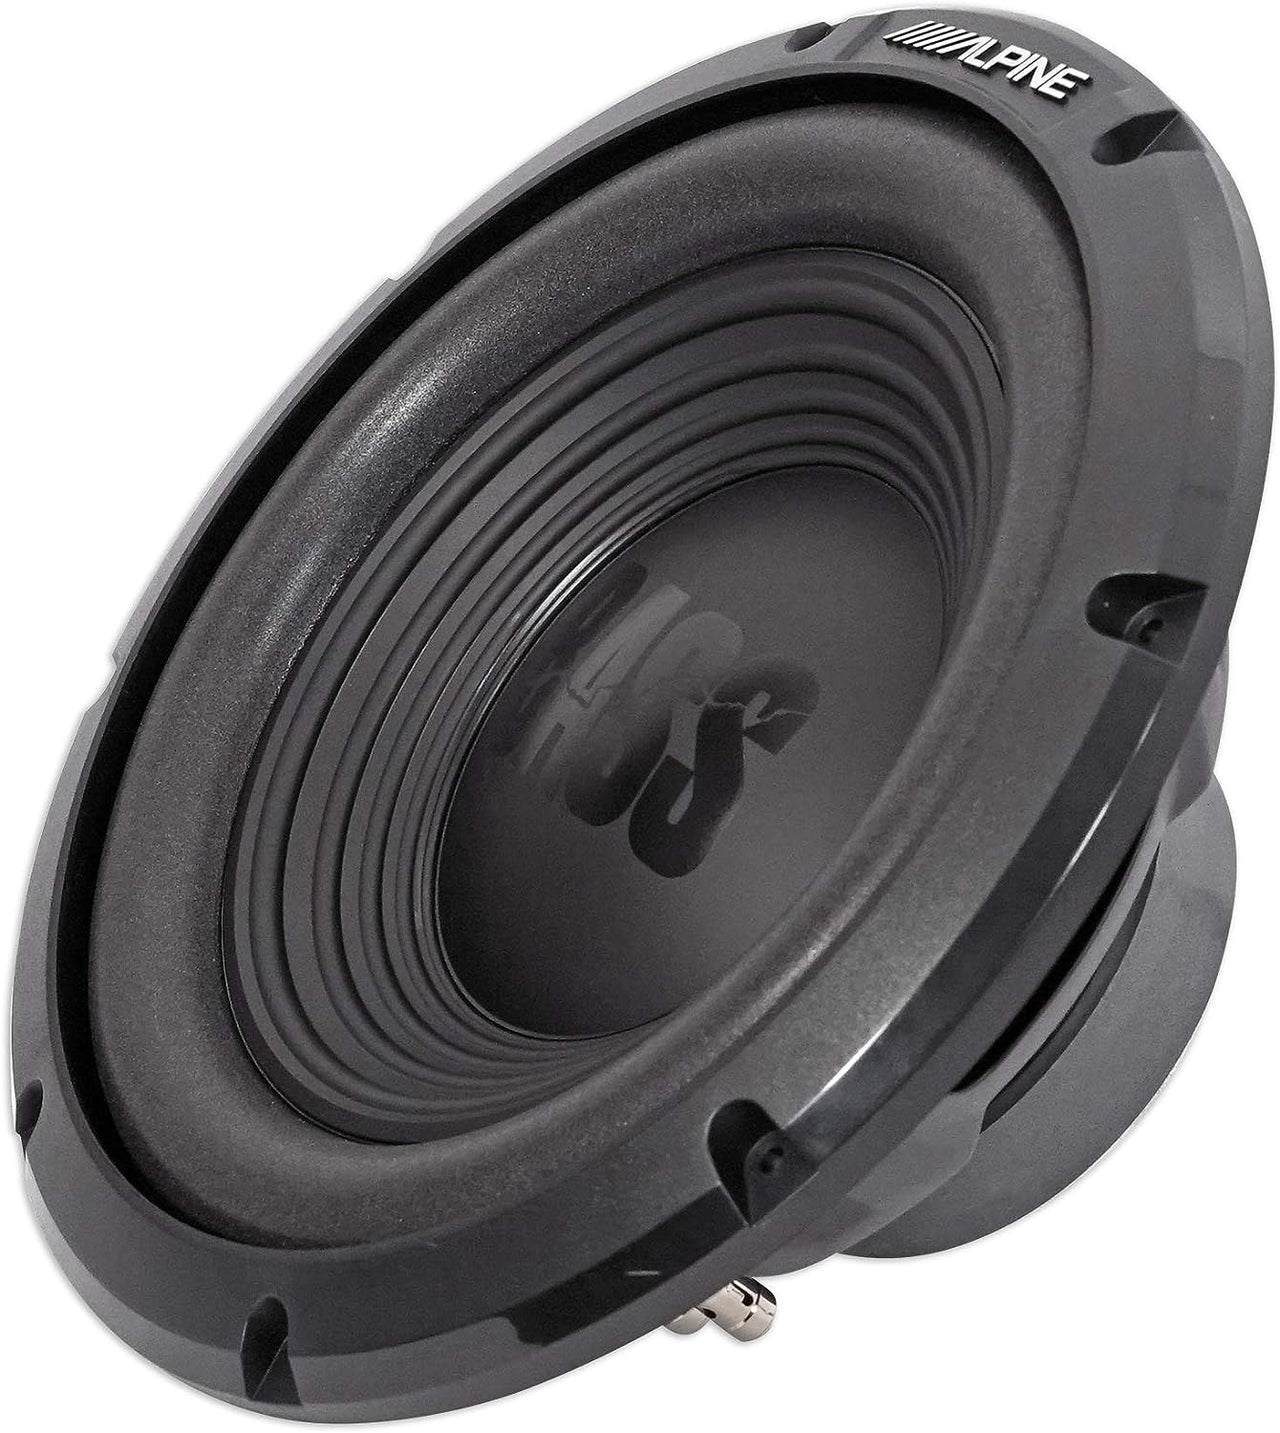 Alpine Bundle Compatible with Universal Vehicles W12S4 Single 12" Loaded Sub Box Enclosure with S2-A60M 1200W Amplifier